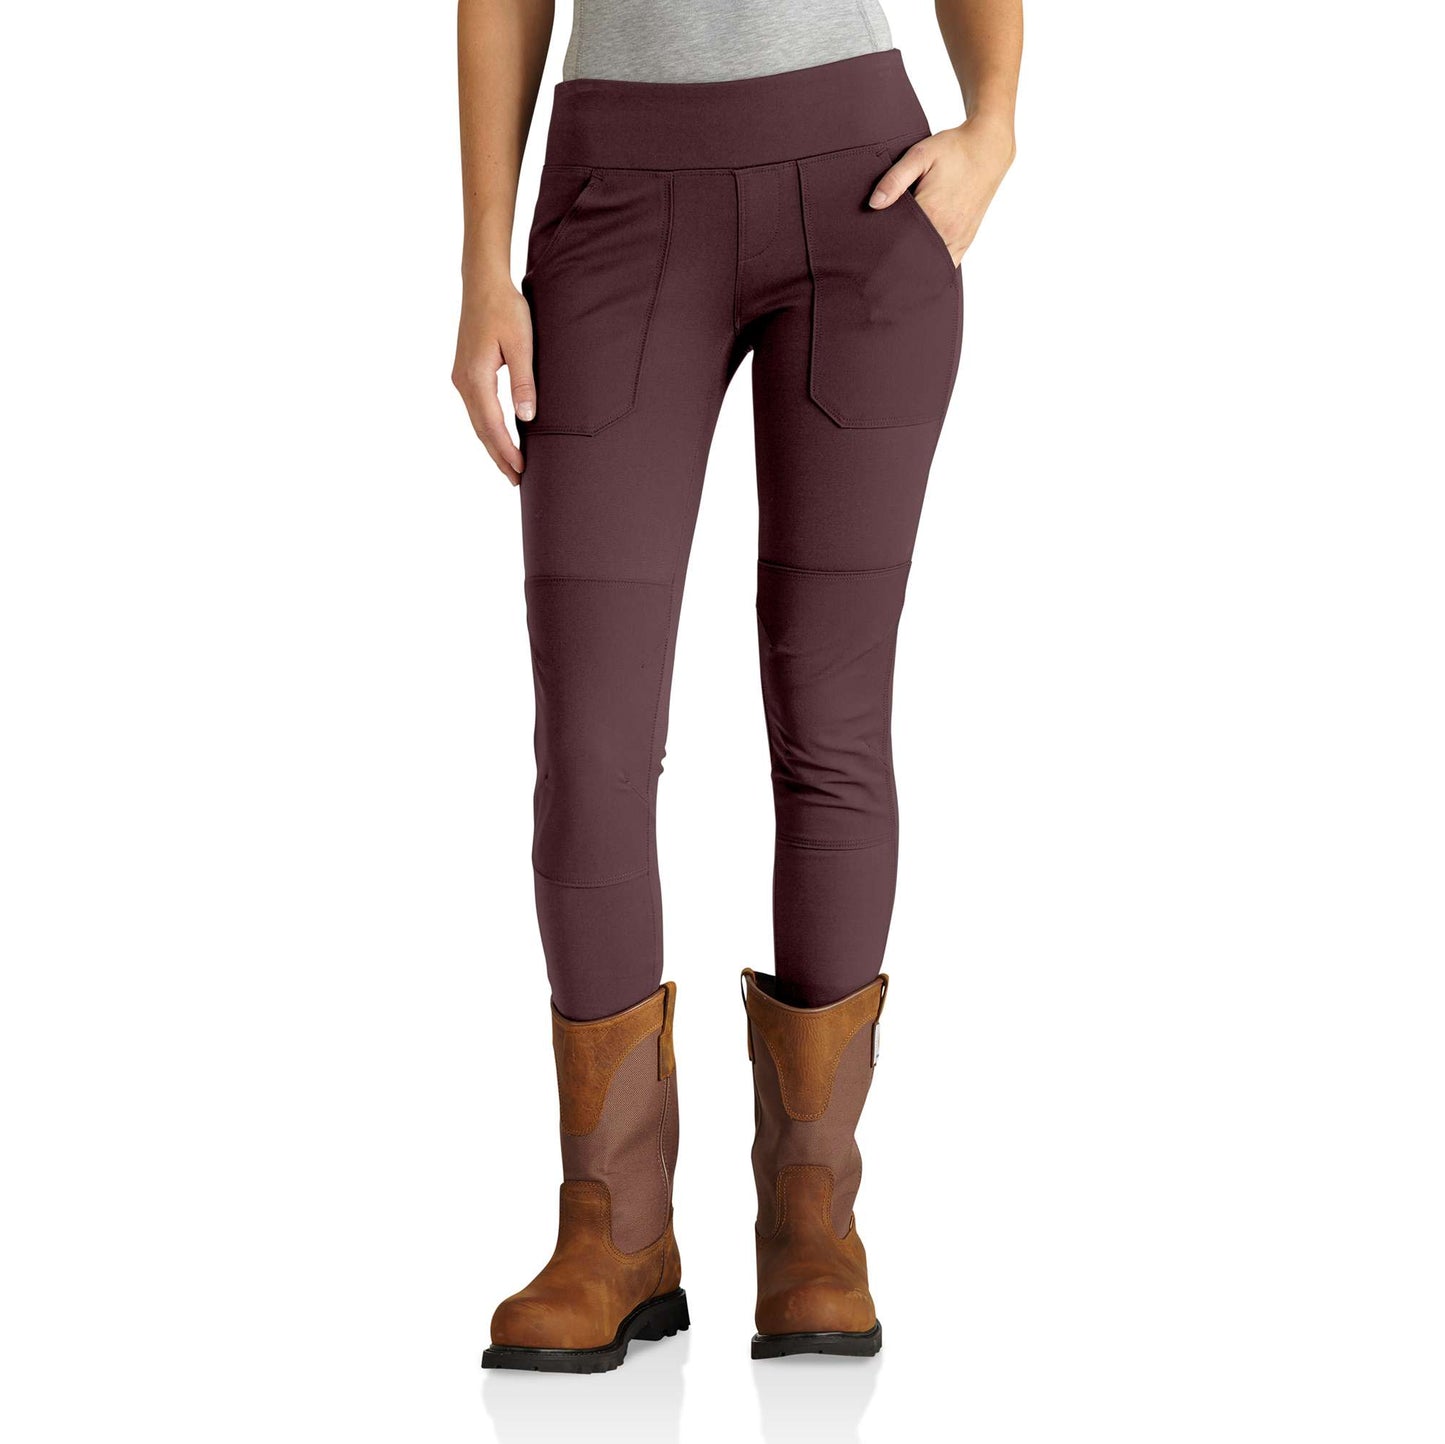 Carhartt Plus Size Force Fitted Midweight Utility Leggings